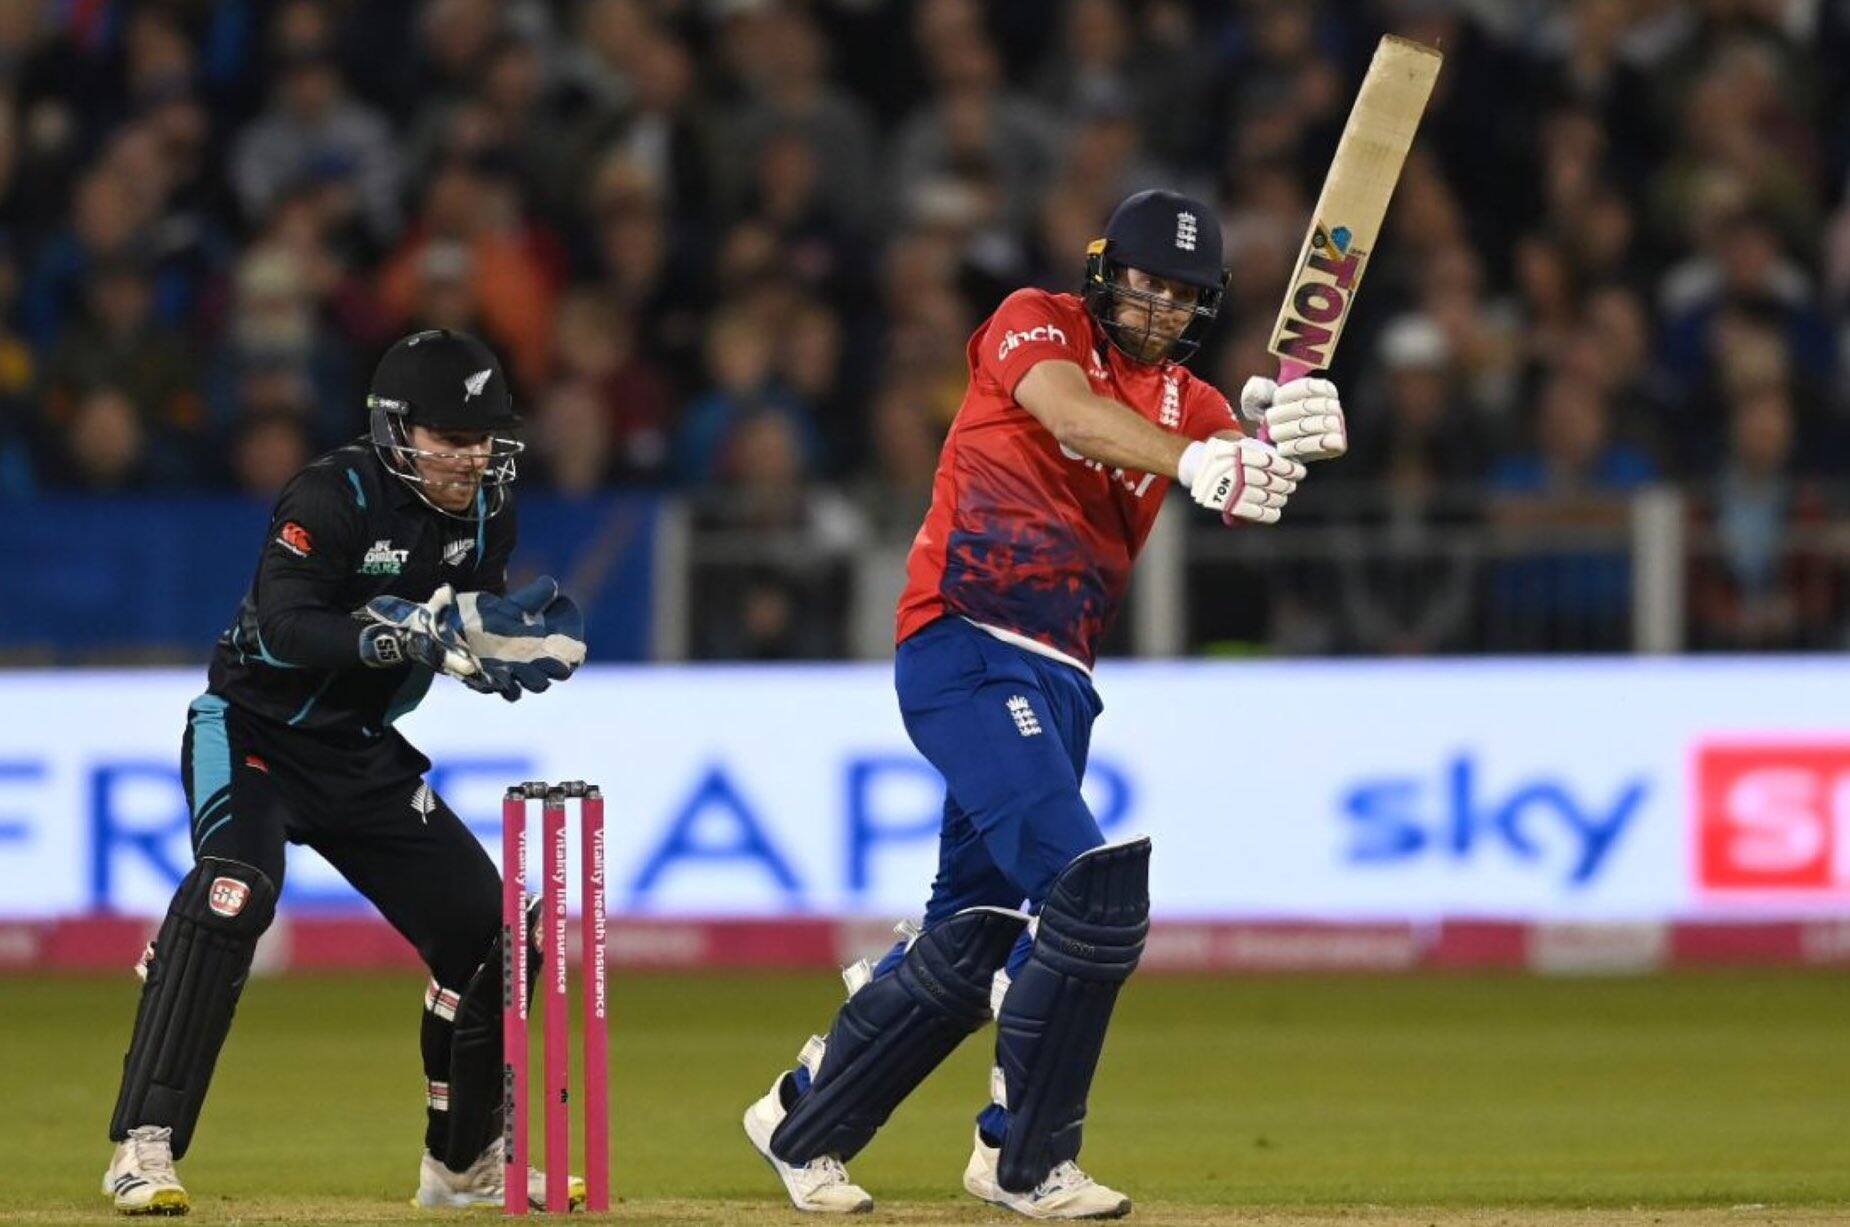 ENG vs NZ | Carse Shines On Debut While Malan Navigates ENG To 1-0 Lead In T20Is